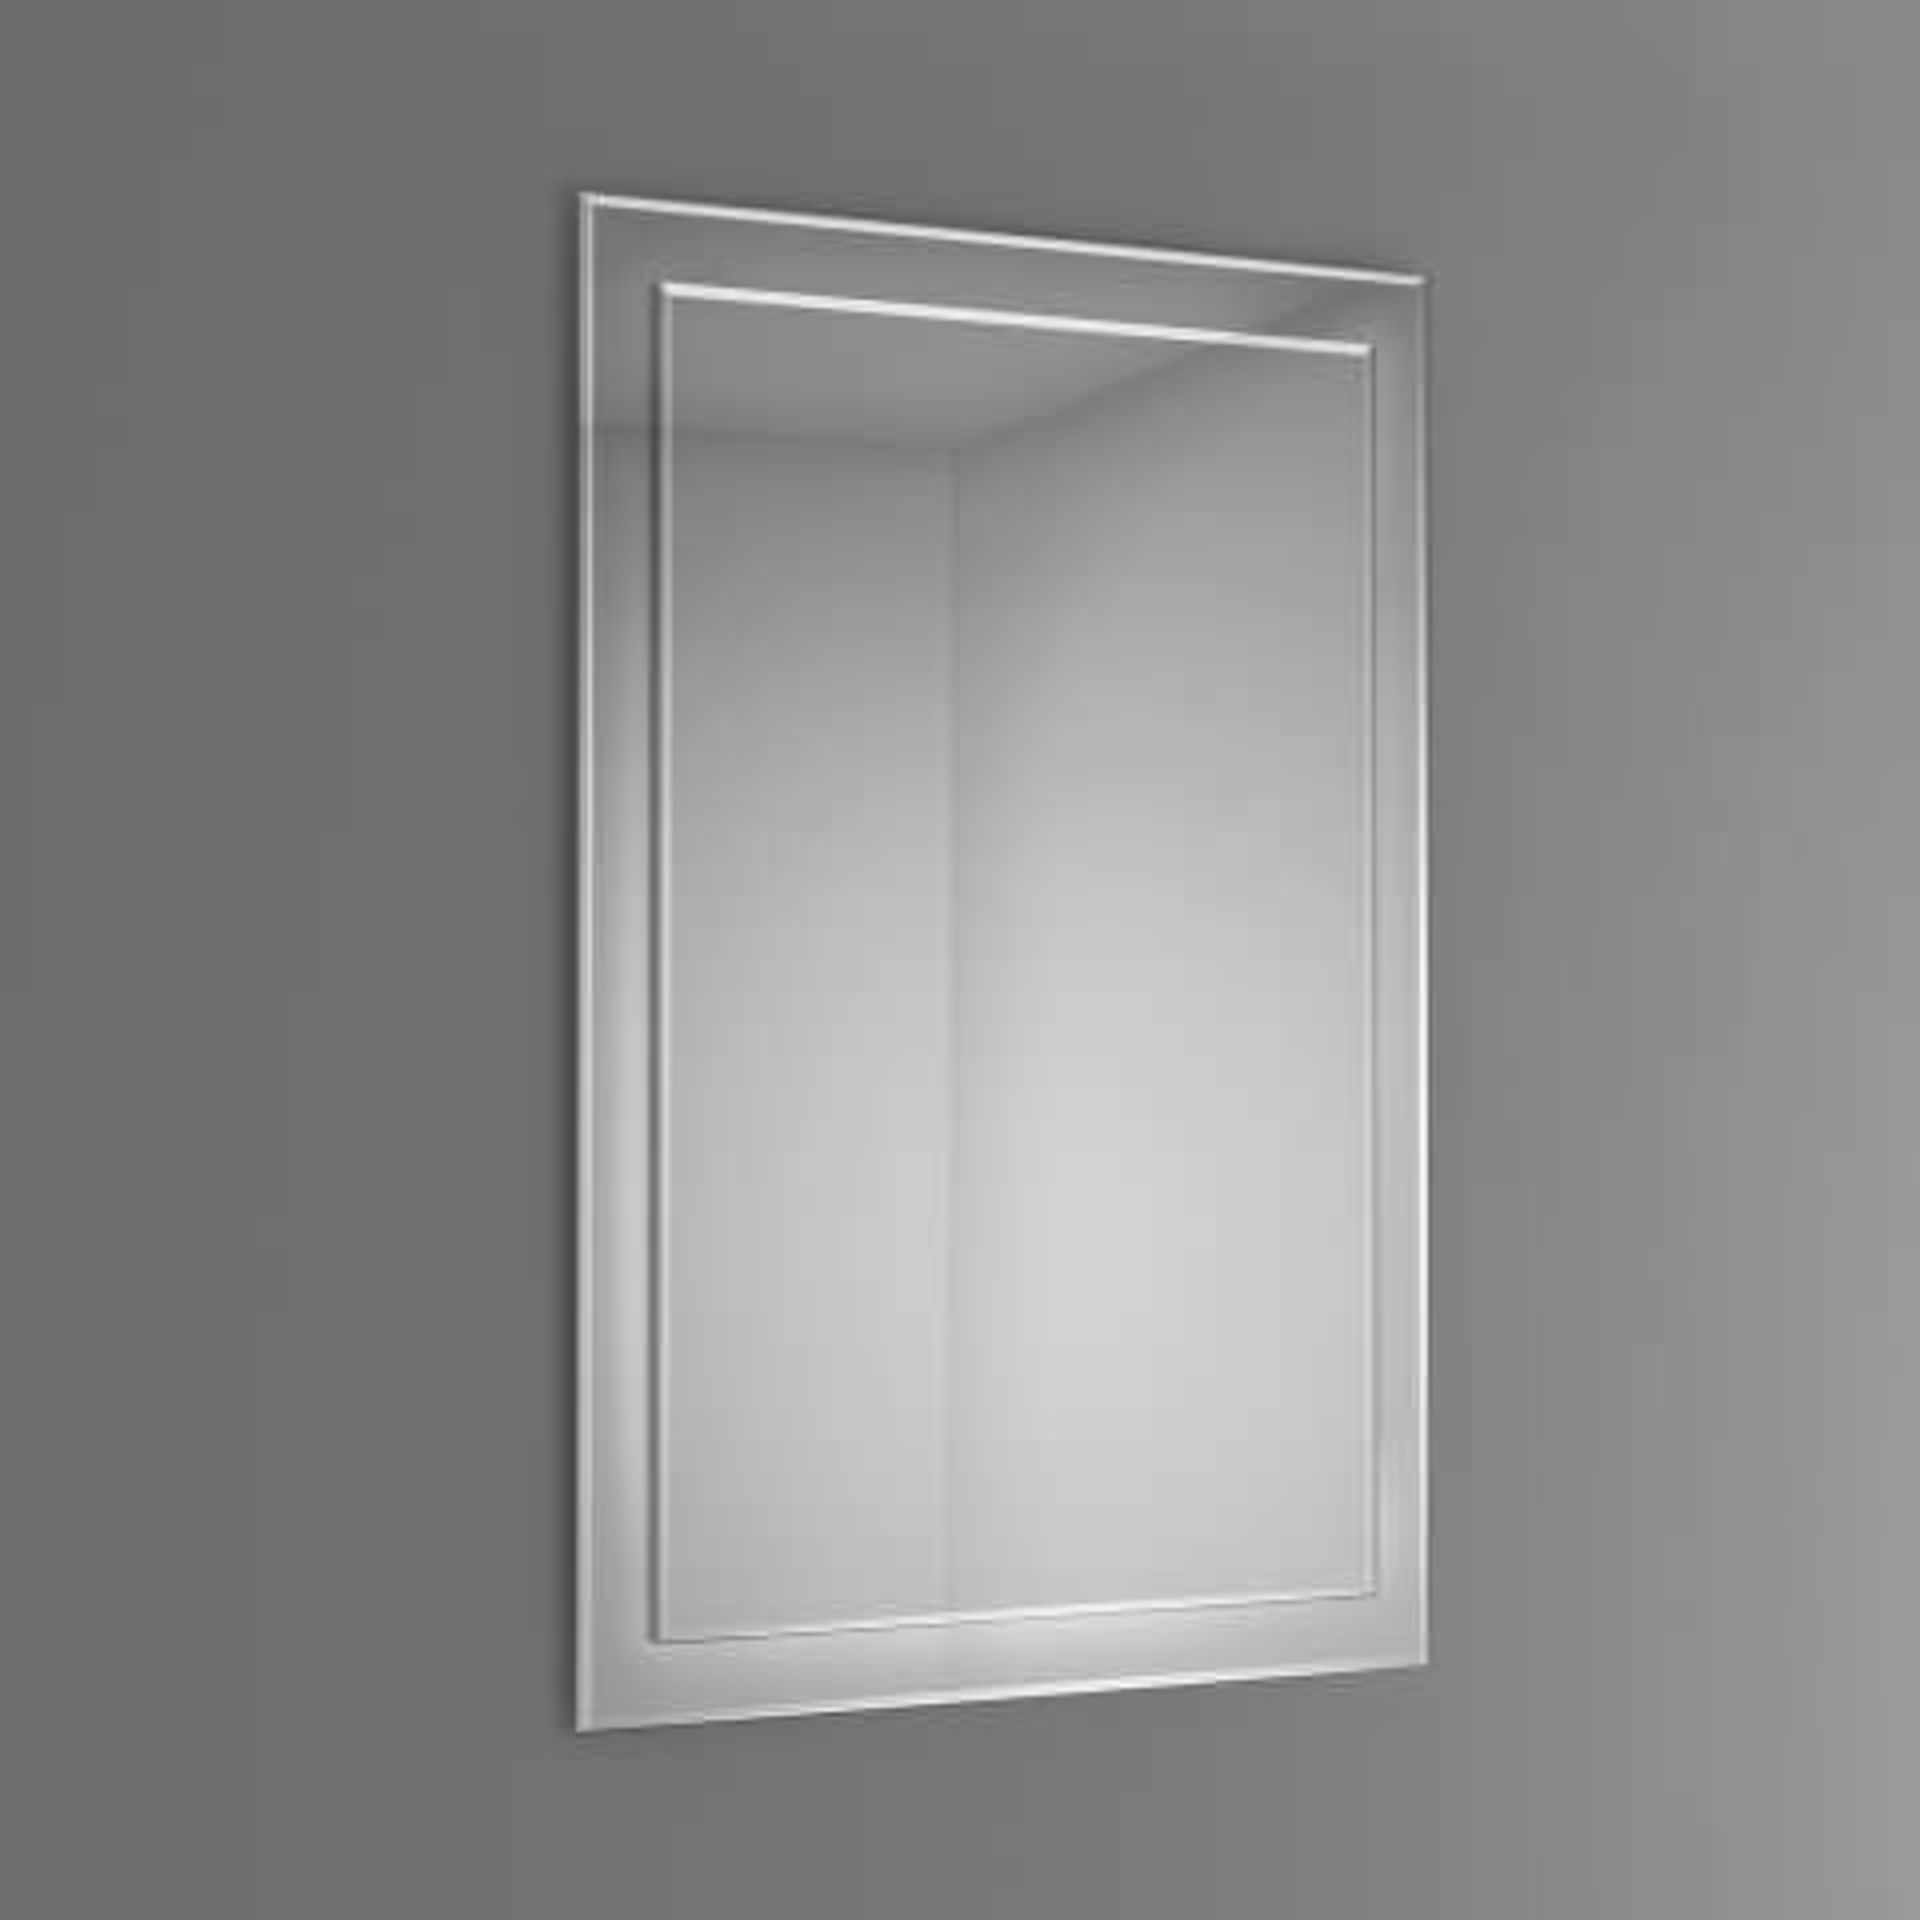 (W58) 500x700mm Bevel Mirror. RRP £199.99. Enjoy reflection perfection with our 500x700 Bevel Mirror - Image 3 of 3